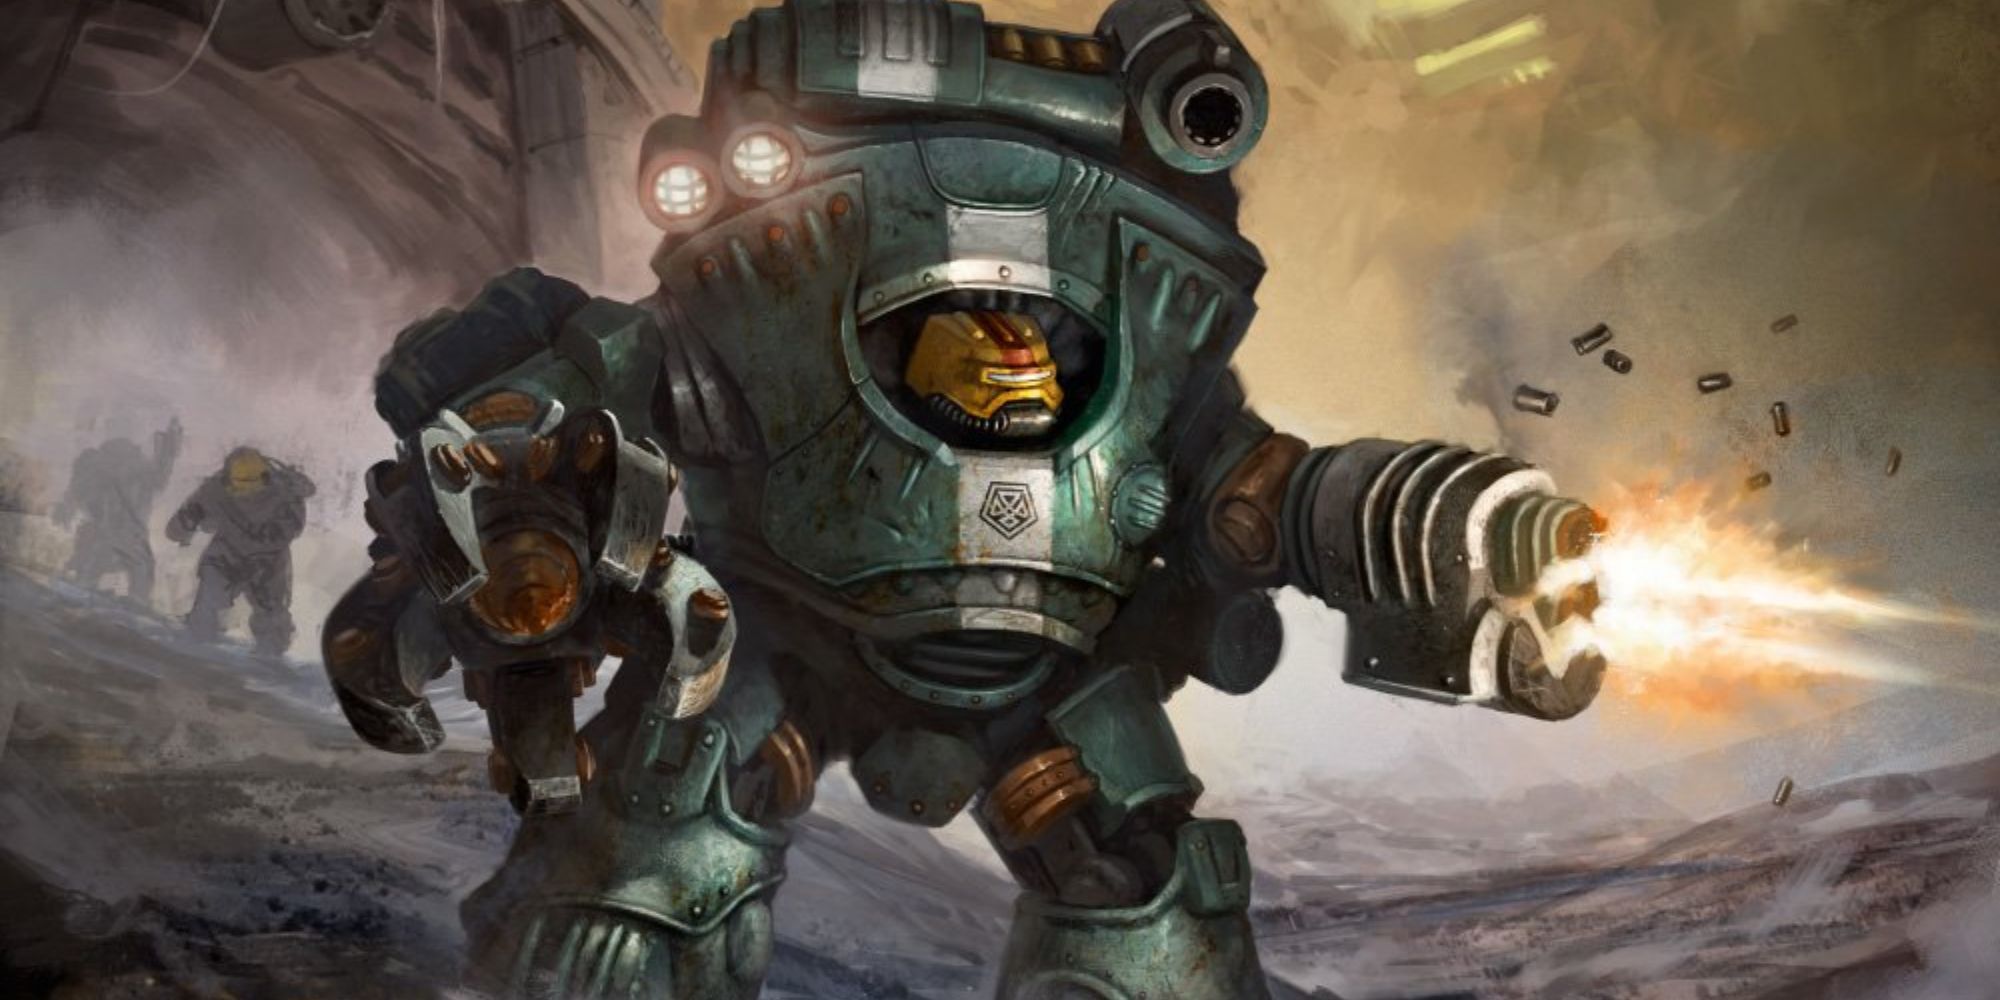 Things You Didn't Know About The Leagues Of Votann In Warhammer 40K